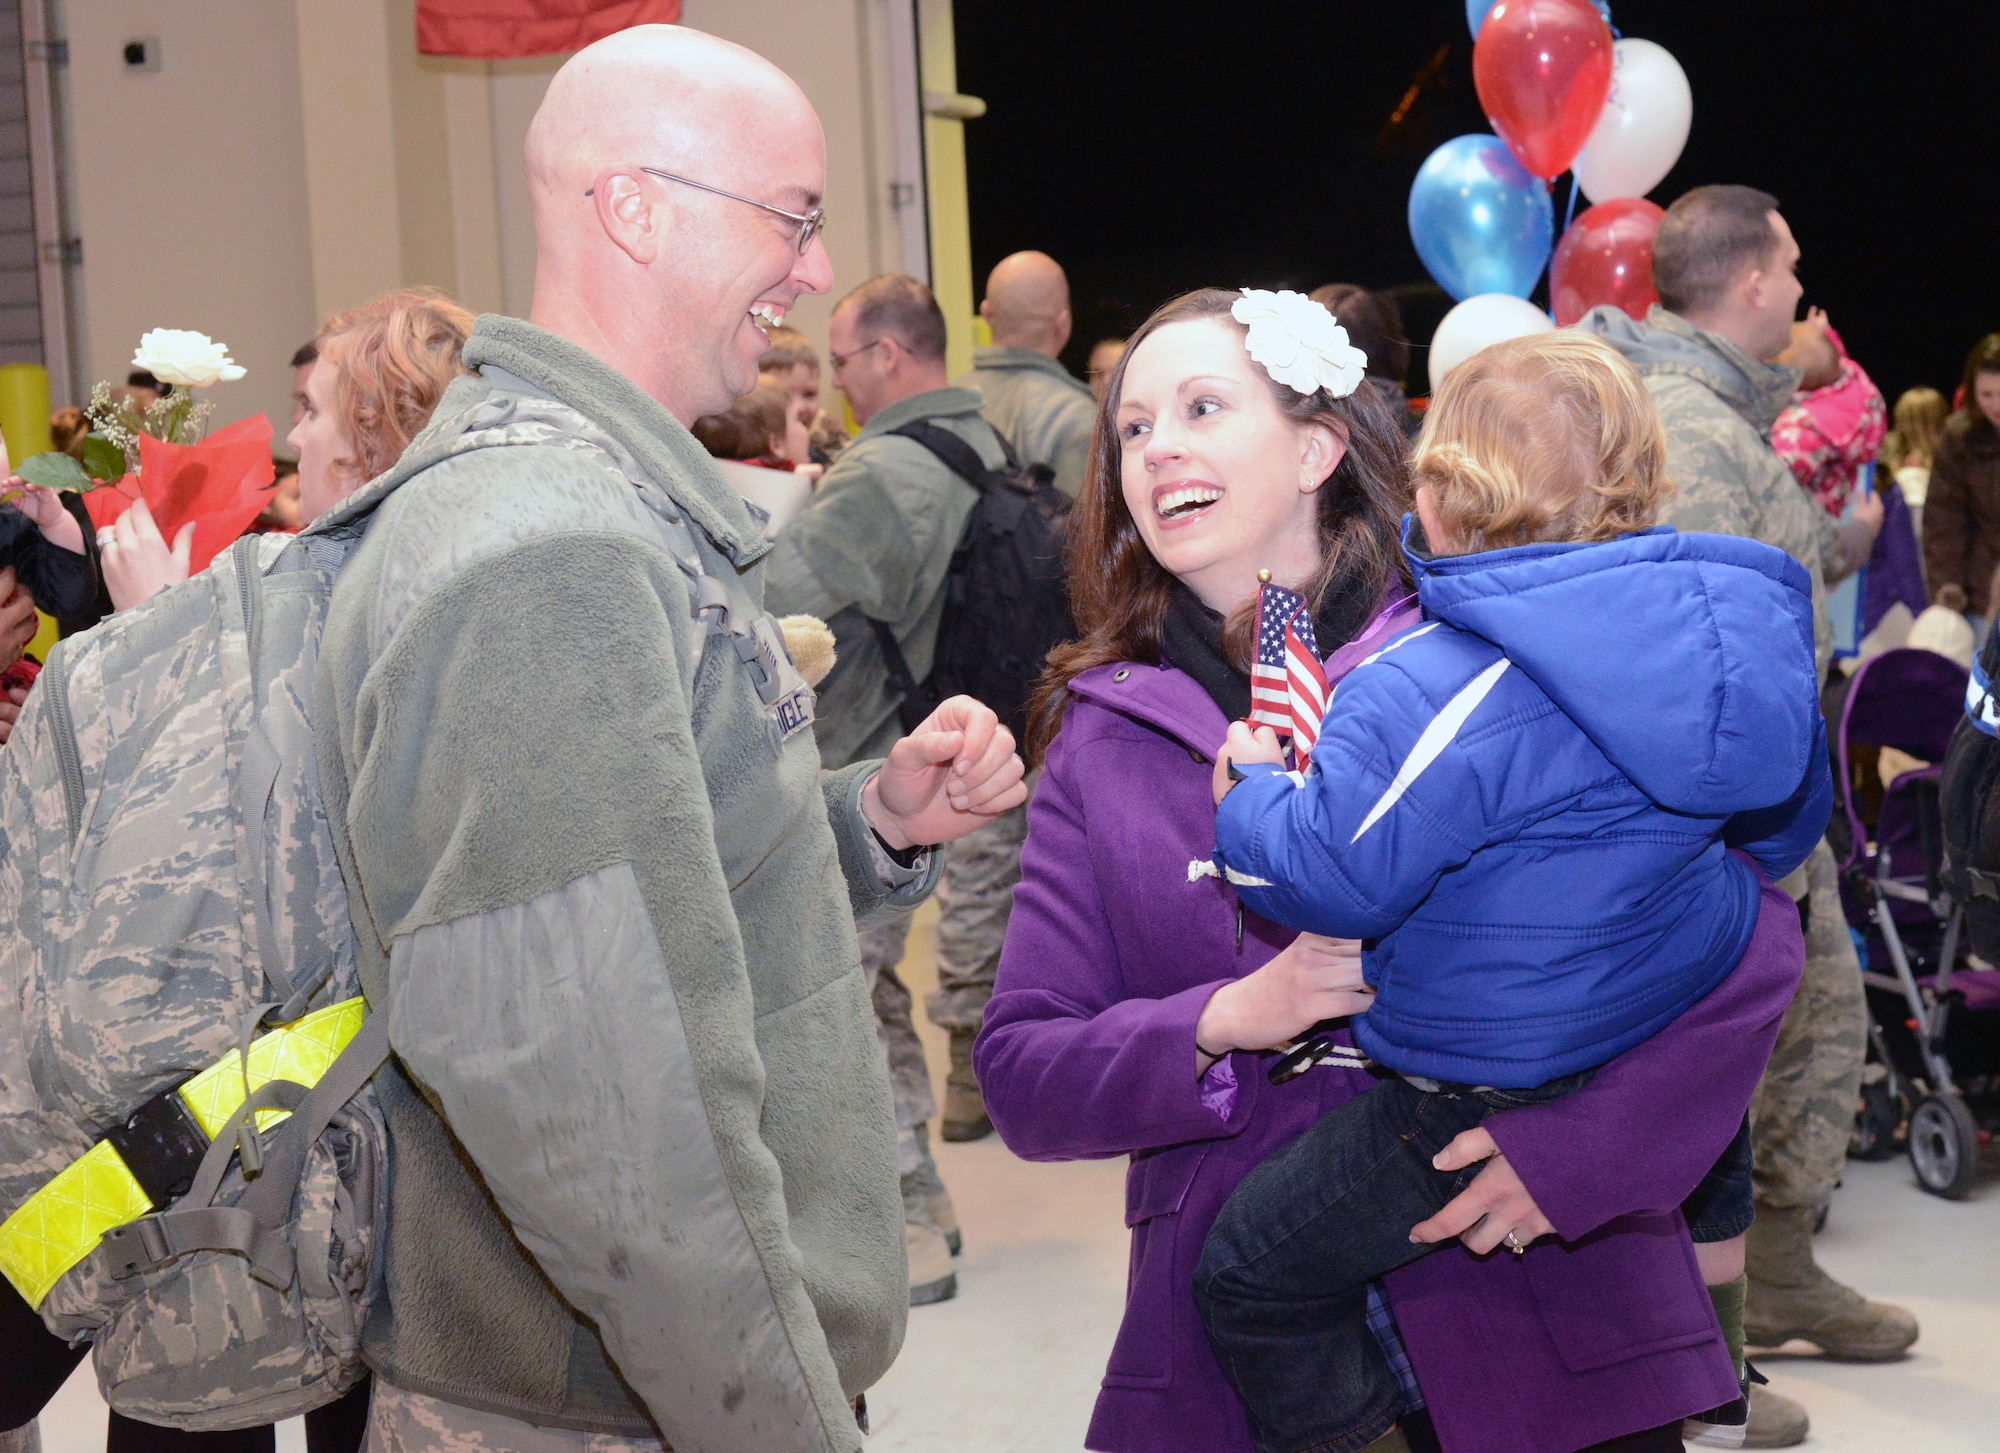 Loved ones reunite after returning from a six-month deployment to Southwest Asia Jan. 19, 2013 at Aviano Air base, Italy. The squadron has had a rich history with its roots reaching back to the very beginnings of the Air Force. It was first activated Dec. 31, 1945, under the U.S. Army Air Corps. The squadron's early years provided air control for major air operations from World War II to include supporting the Berlin Airlift.(U.S. Air Force photo/Senior Airman Michael Battles)